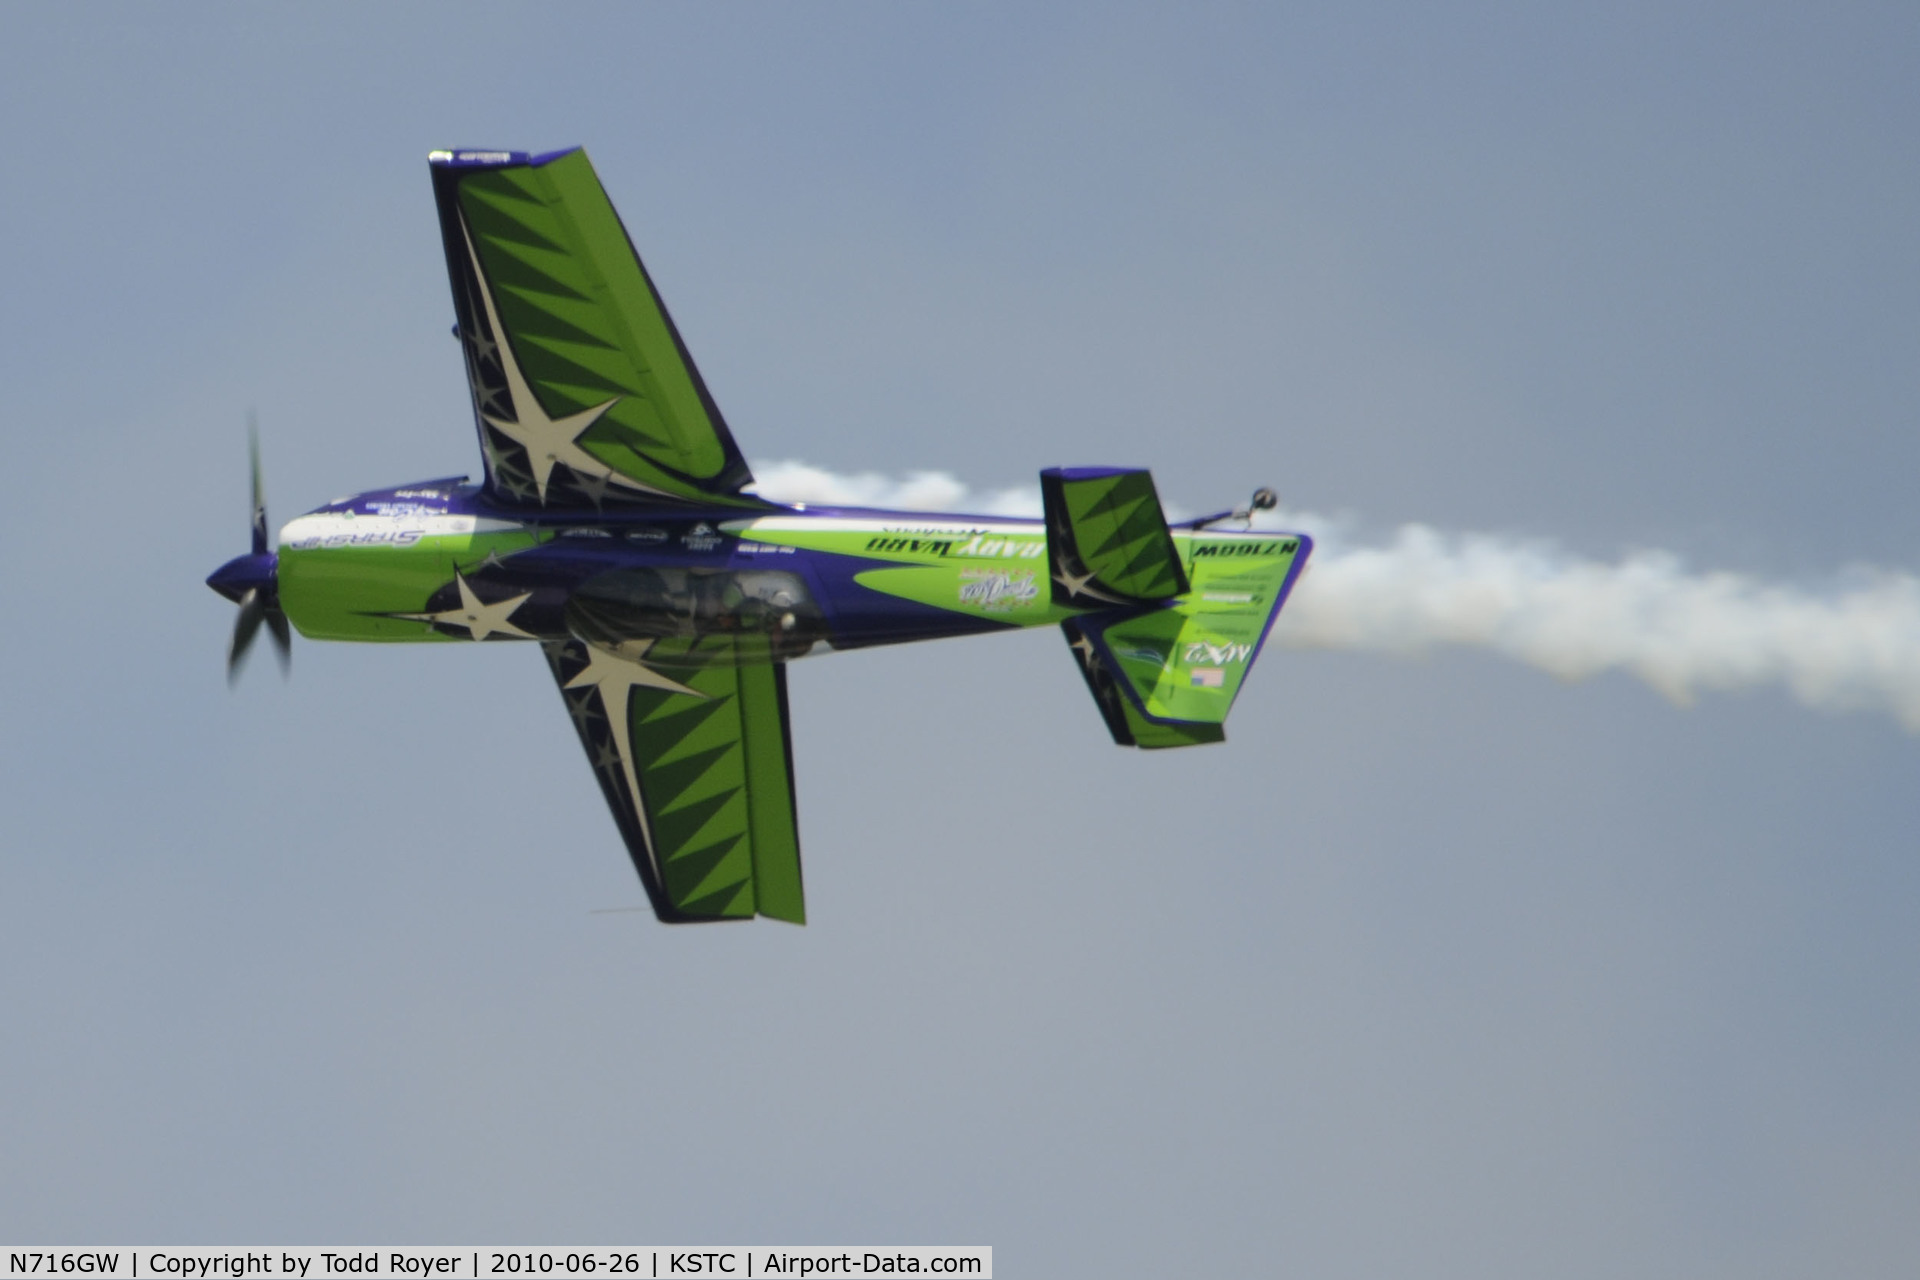 N716GW, 2006 MX Aircraft MX2 C/N 4, performing at the 2010 Great Minnesota Air Show